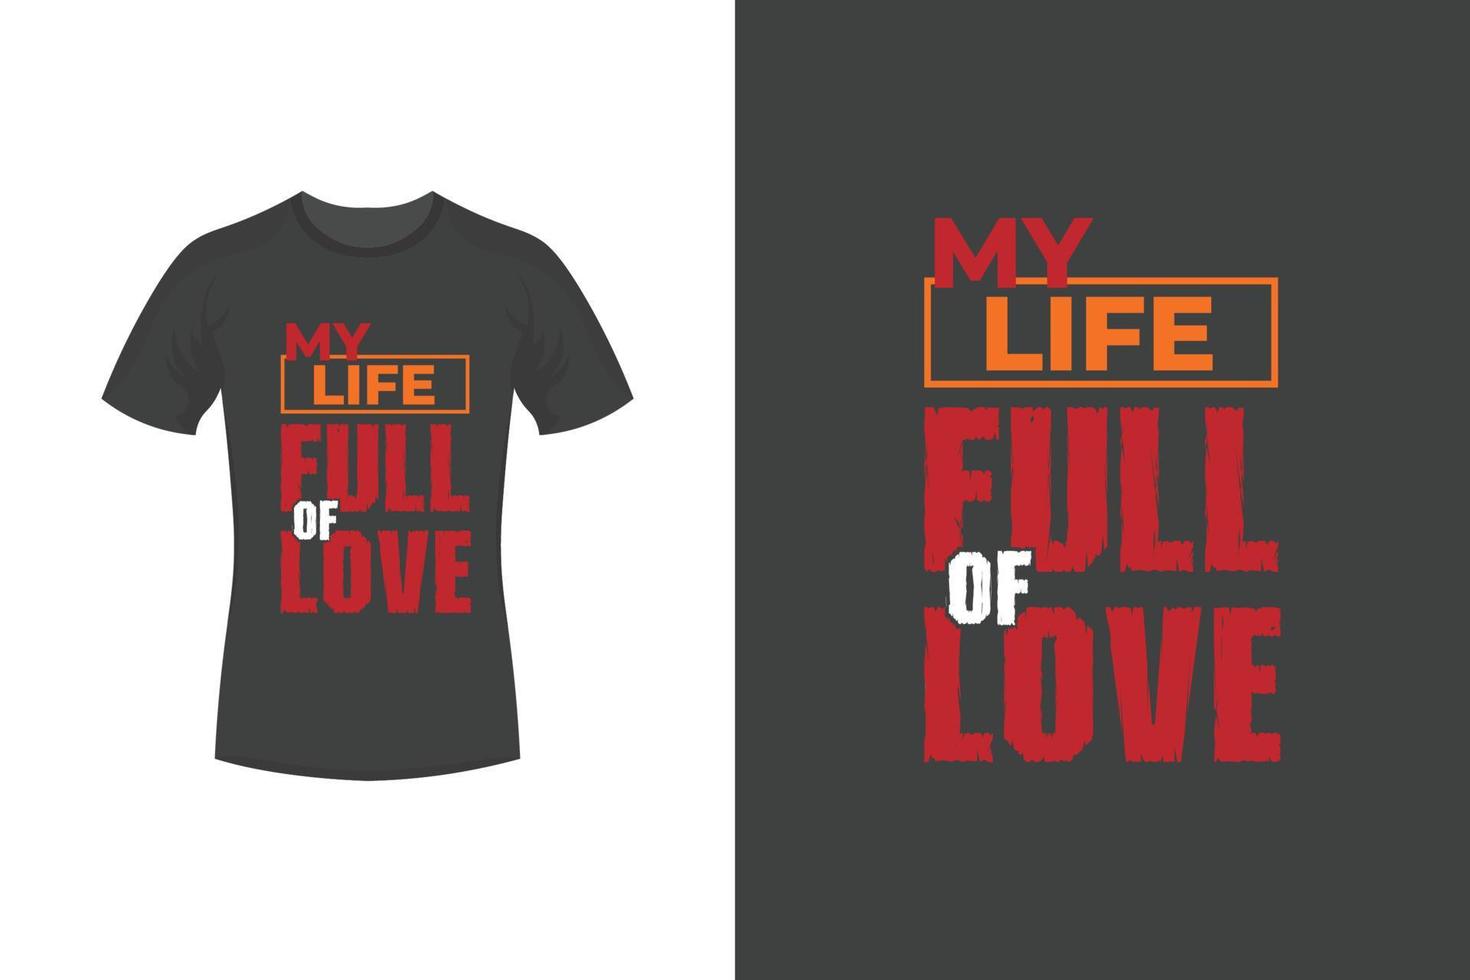 My life full of life motivational quotes and typography t shirt design vector